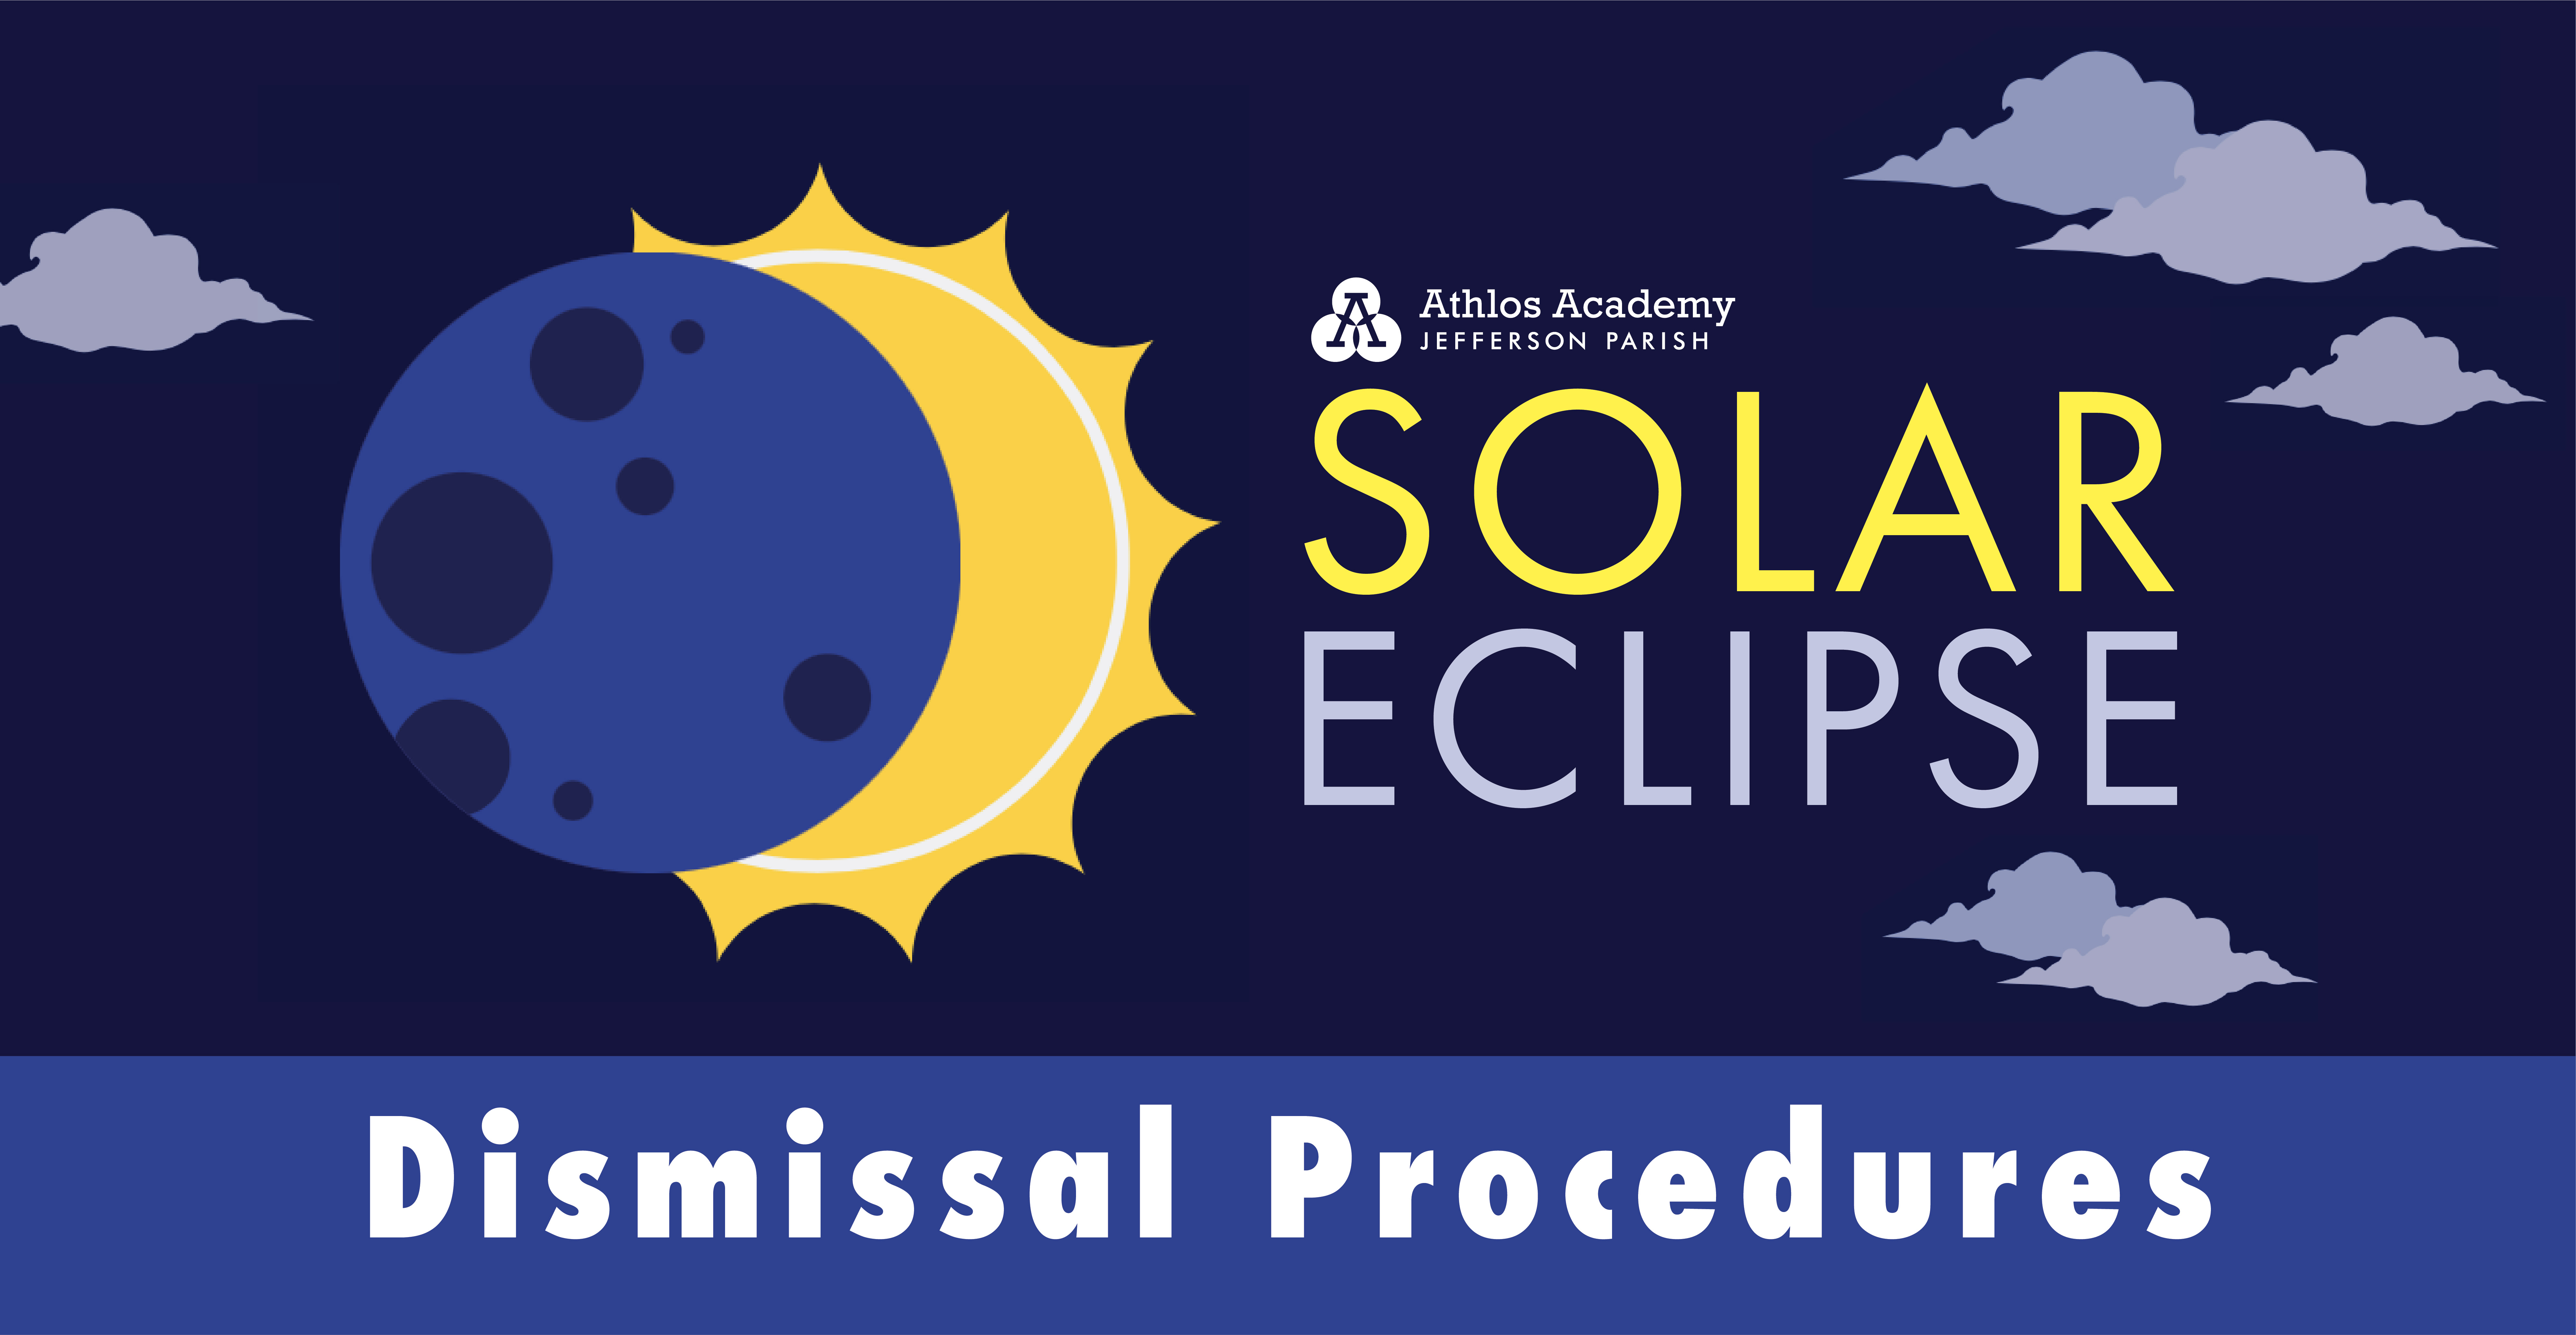 We are anticipating to experience a partial eclipse from 12:29 p.m. - 3:08 p.m. As a result, we will adjust dismissal which may impact drop off time for buses by 15 minutes. This may mean your students bus may arrive 15-20 minutes after the scheduled drop off time. For car drivers, Driveline will open at 3:15 p.m.